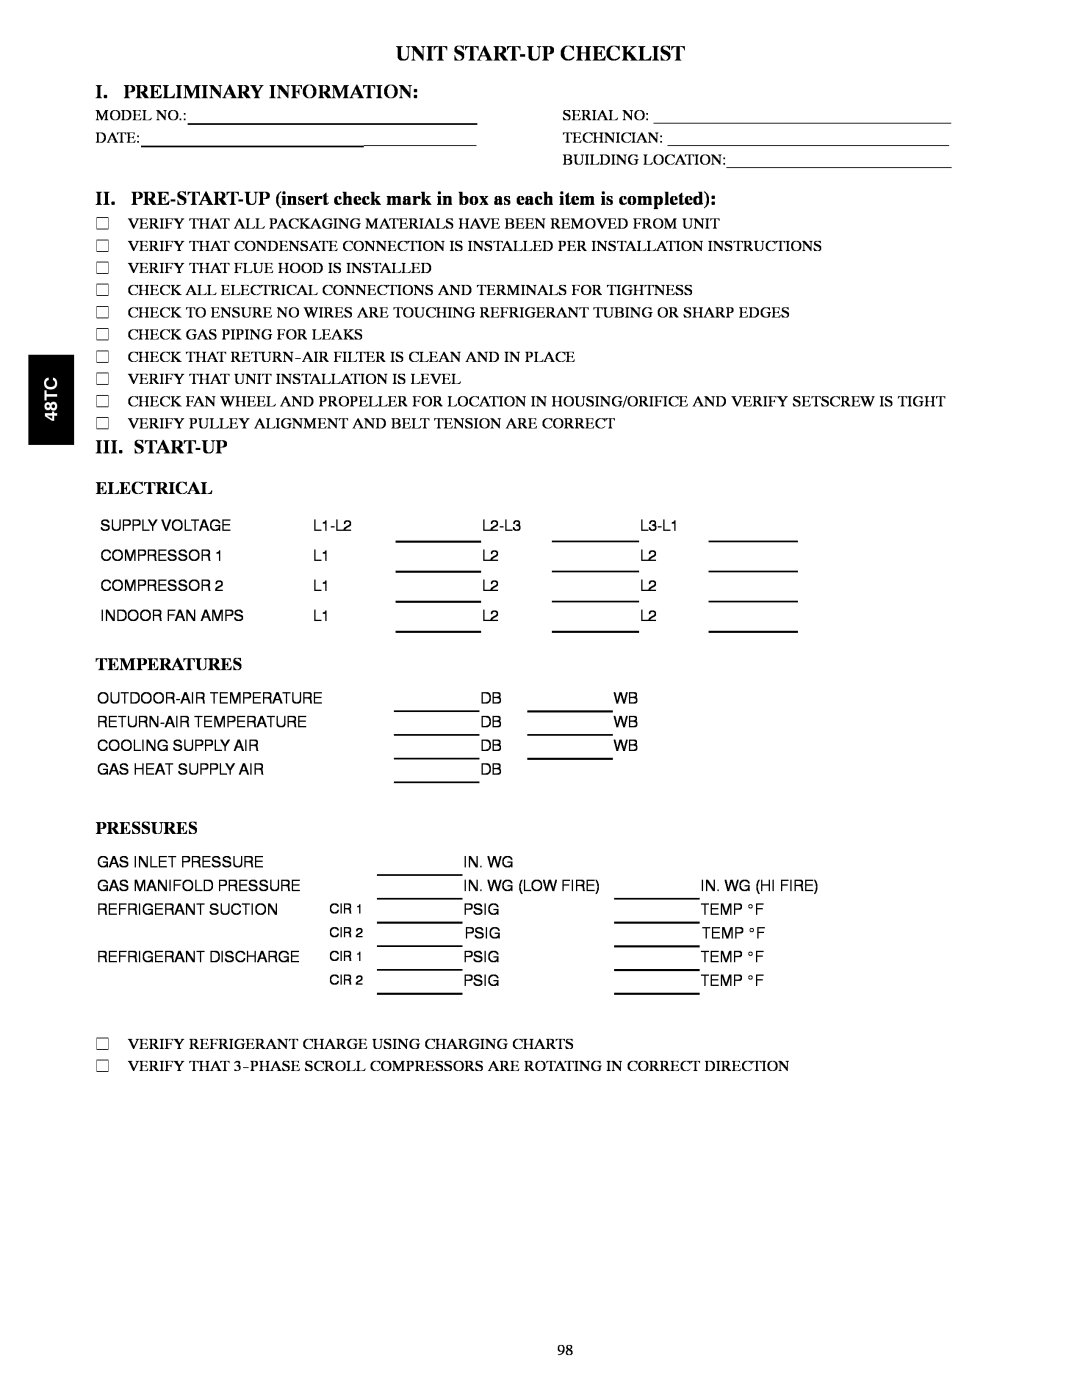 Carrier 48TC*D08 Unit Start-Upchecklist, I. Preliminary Information, Iii. Start-Up, Electrical, Temperatures, Pressures 